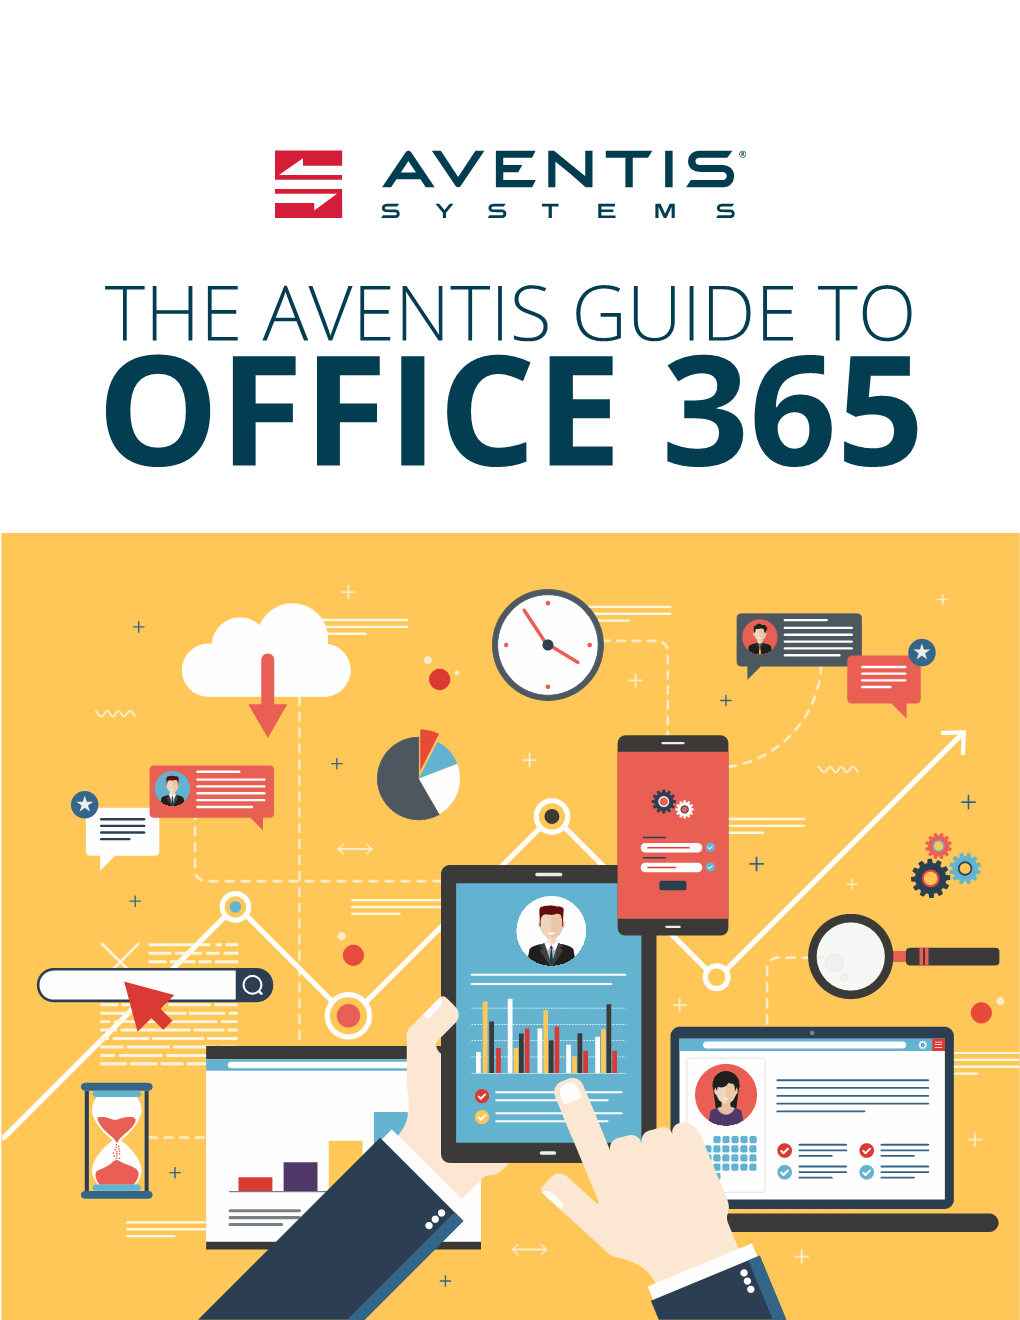 The Aventis Guide to Office 365 Table of Contents